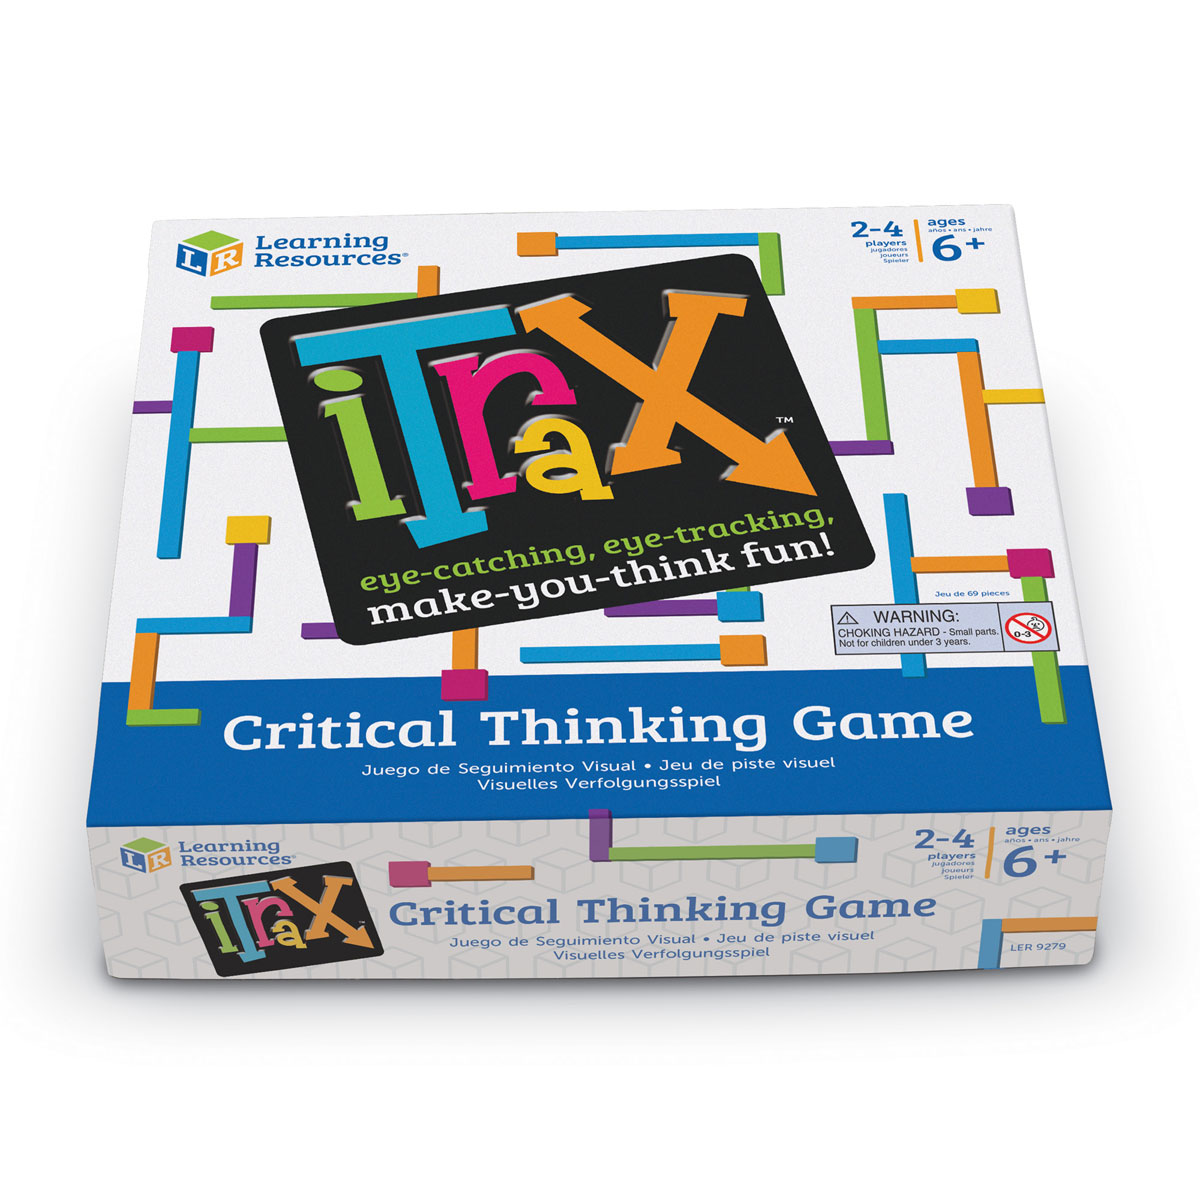 games about critical thinking